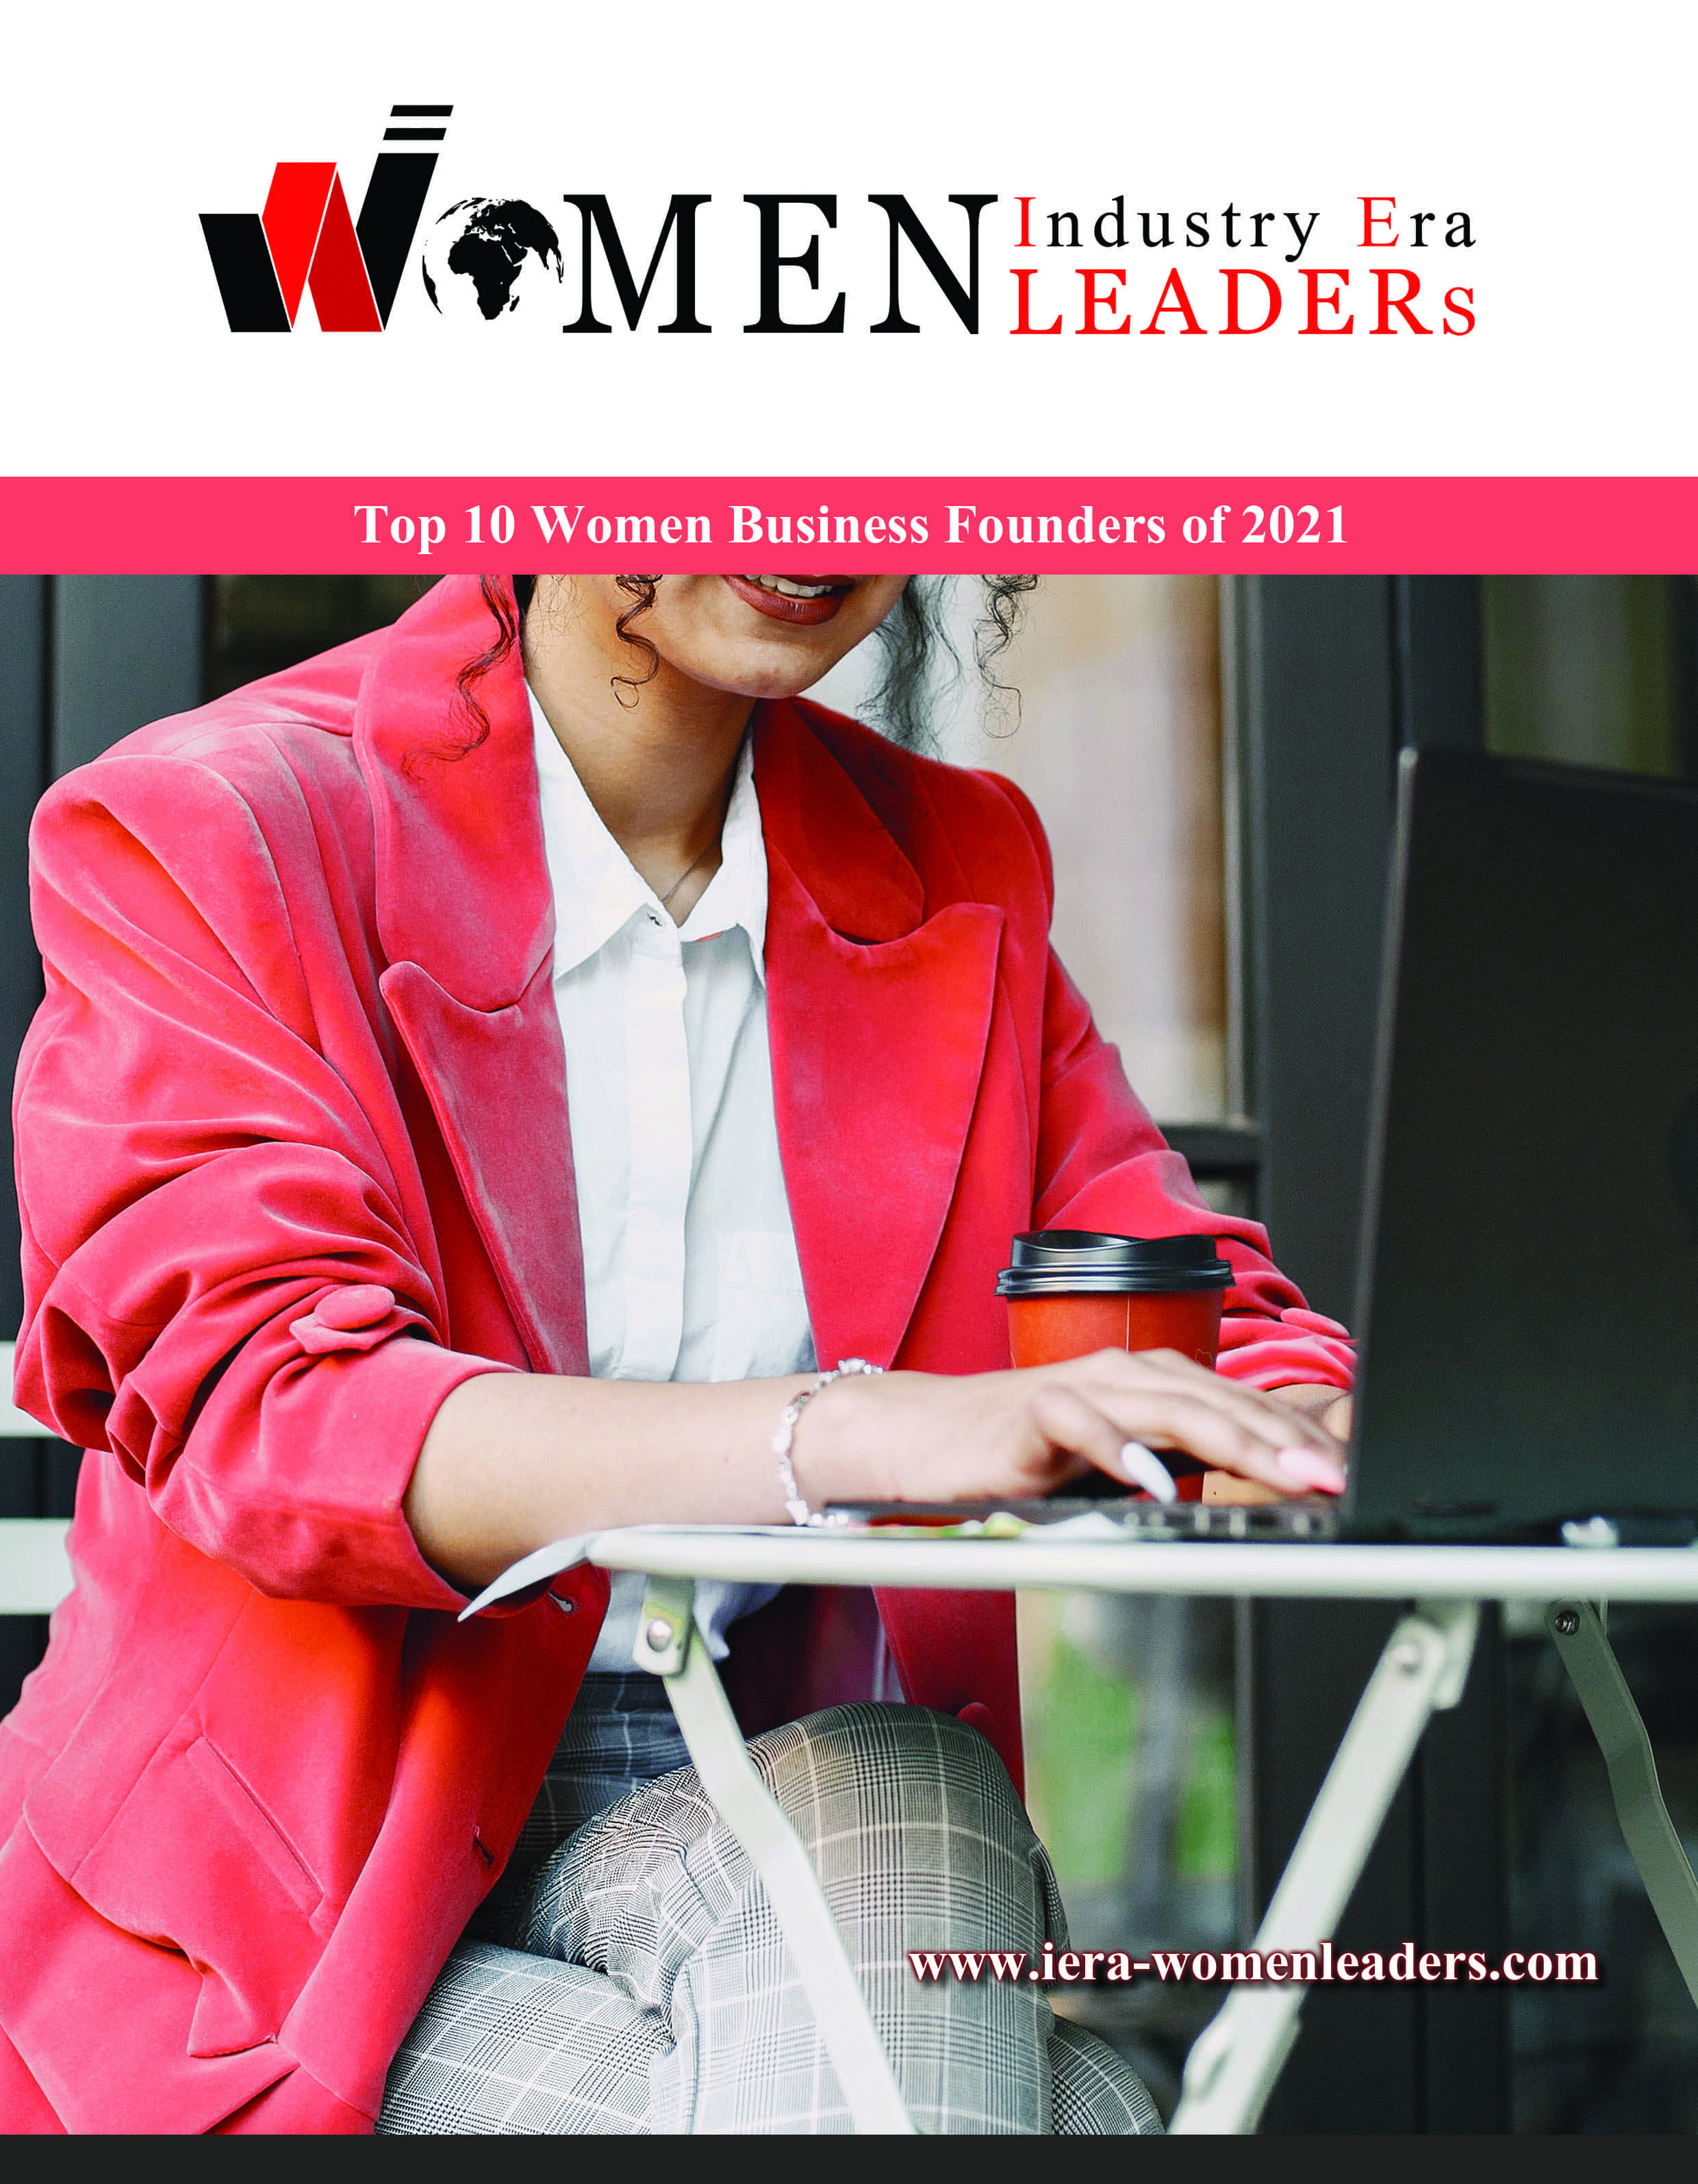 Top 10 Women Business Founders of 2021 Magazine